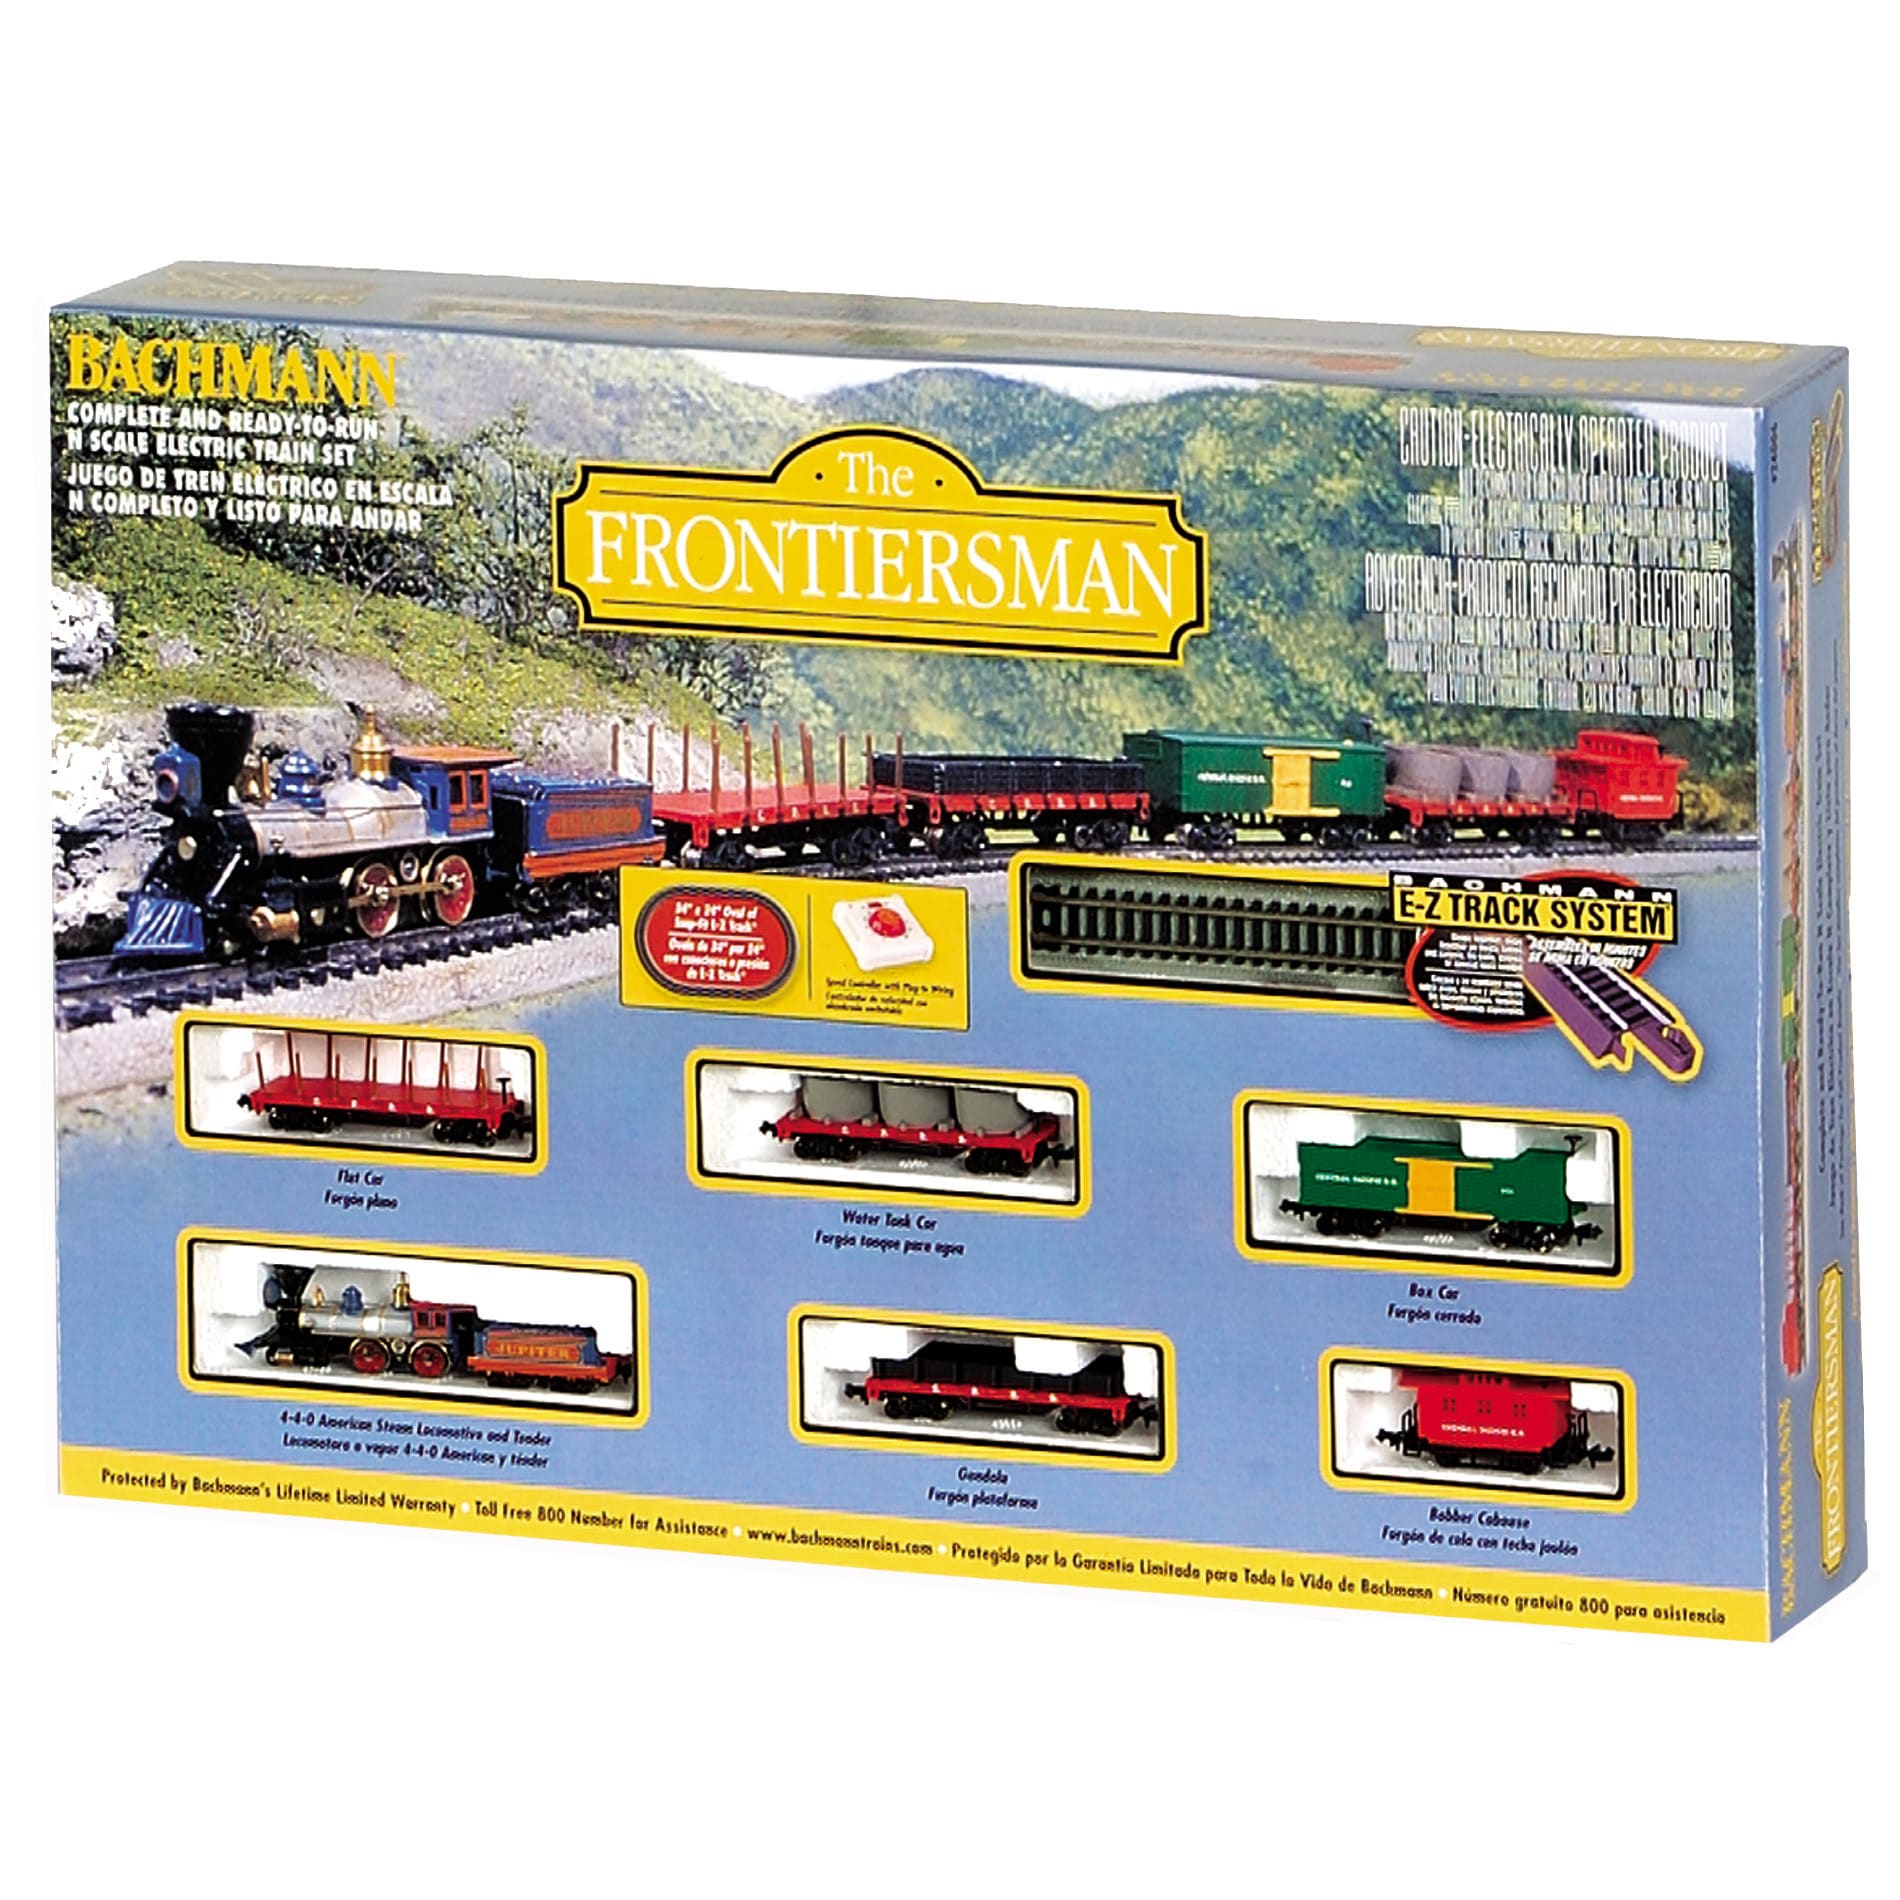  13922737 - Overstock.com Shopping - Big Discounts on Bachmann Trains